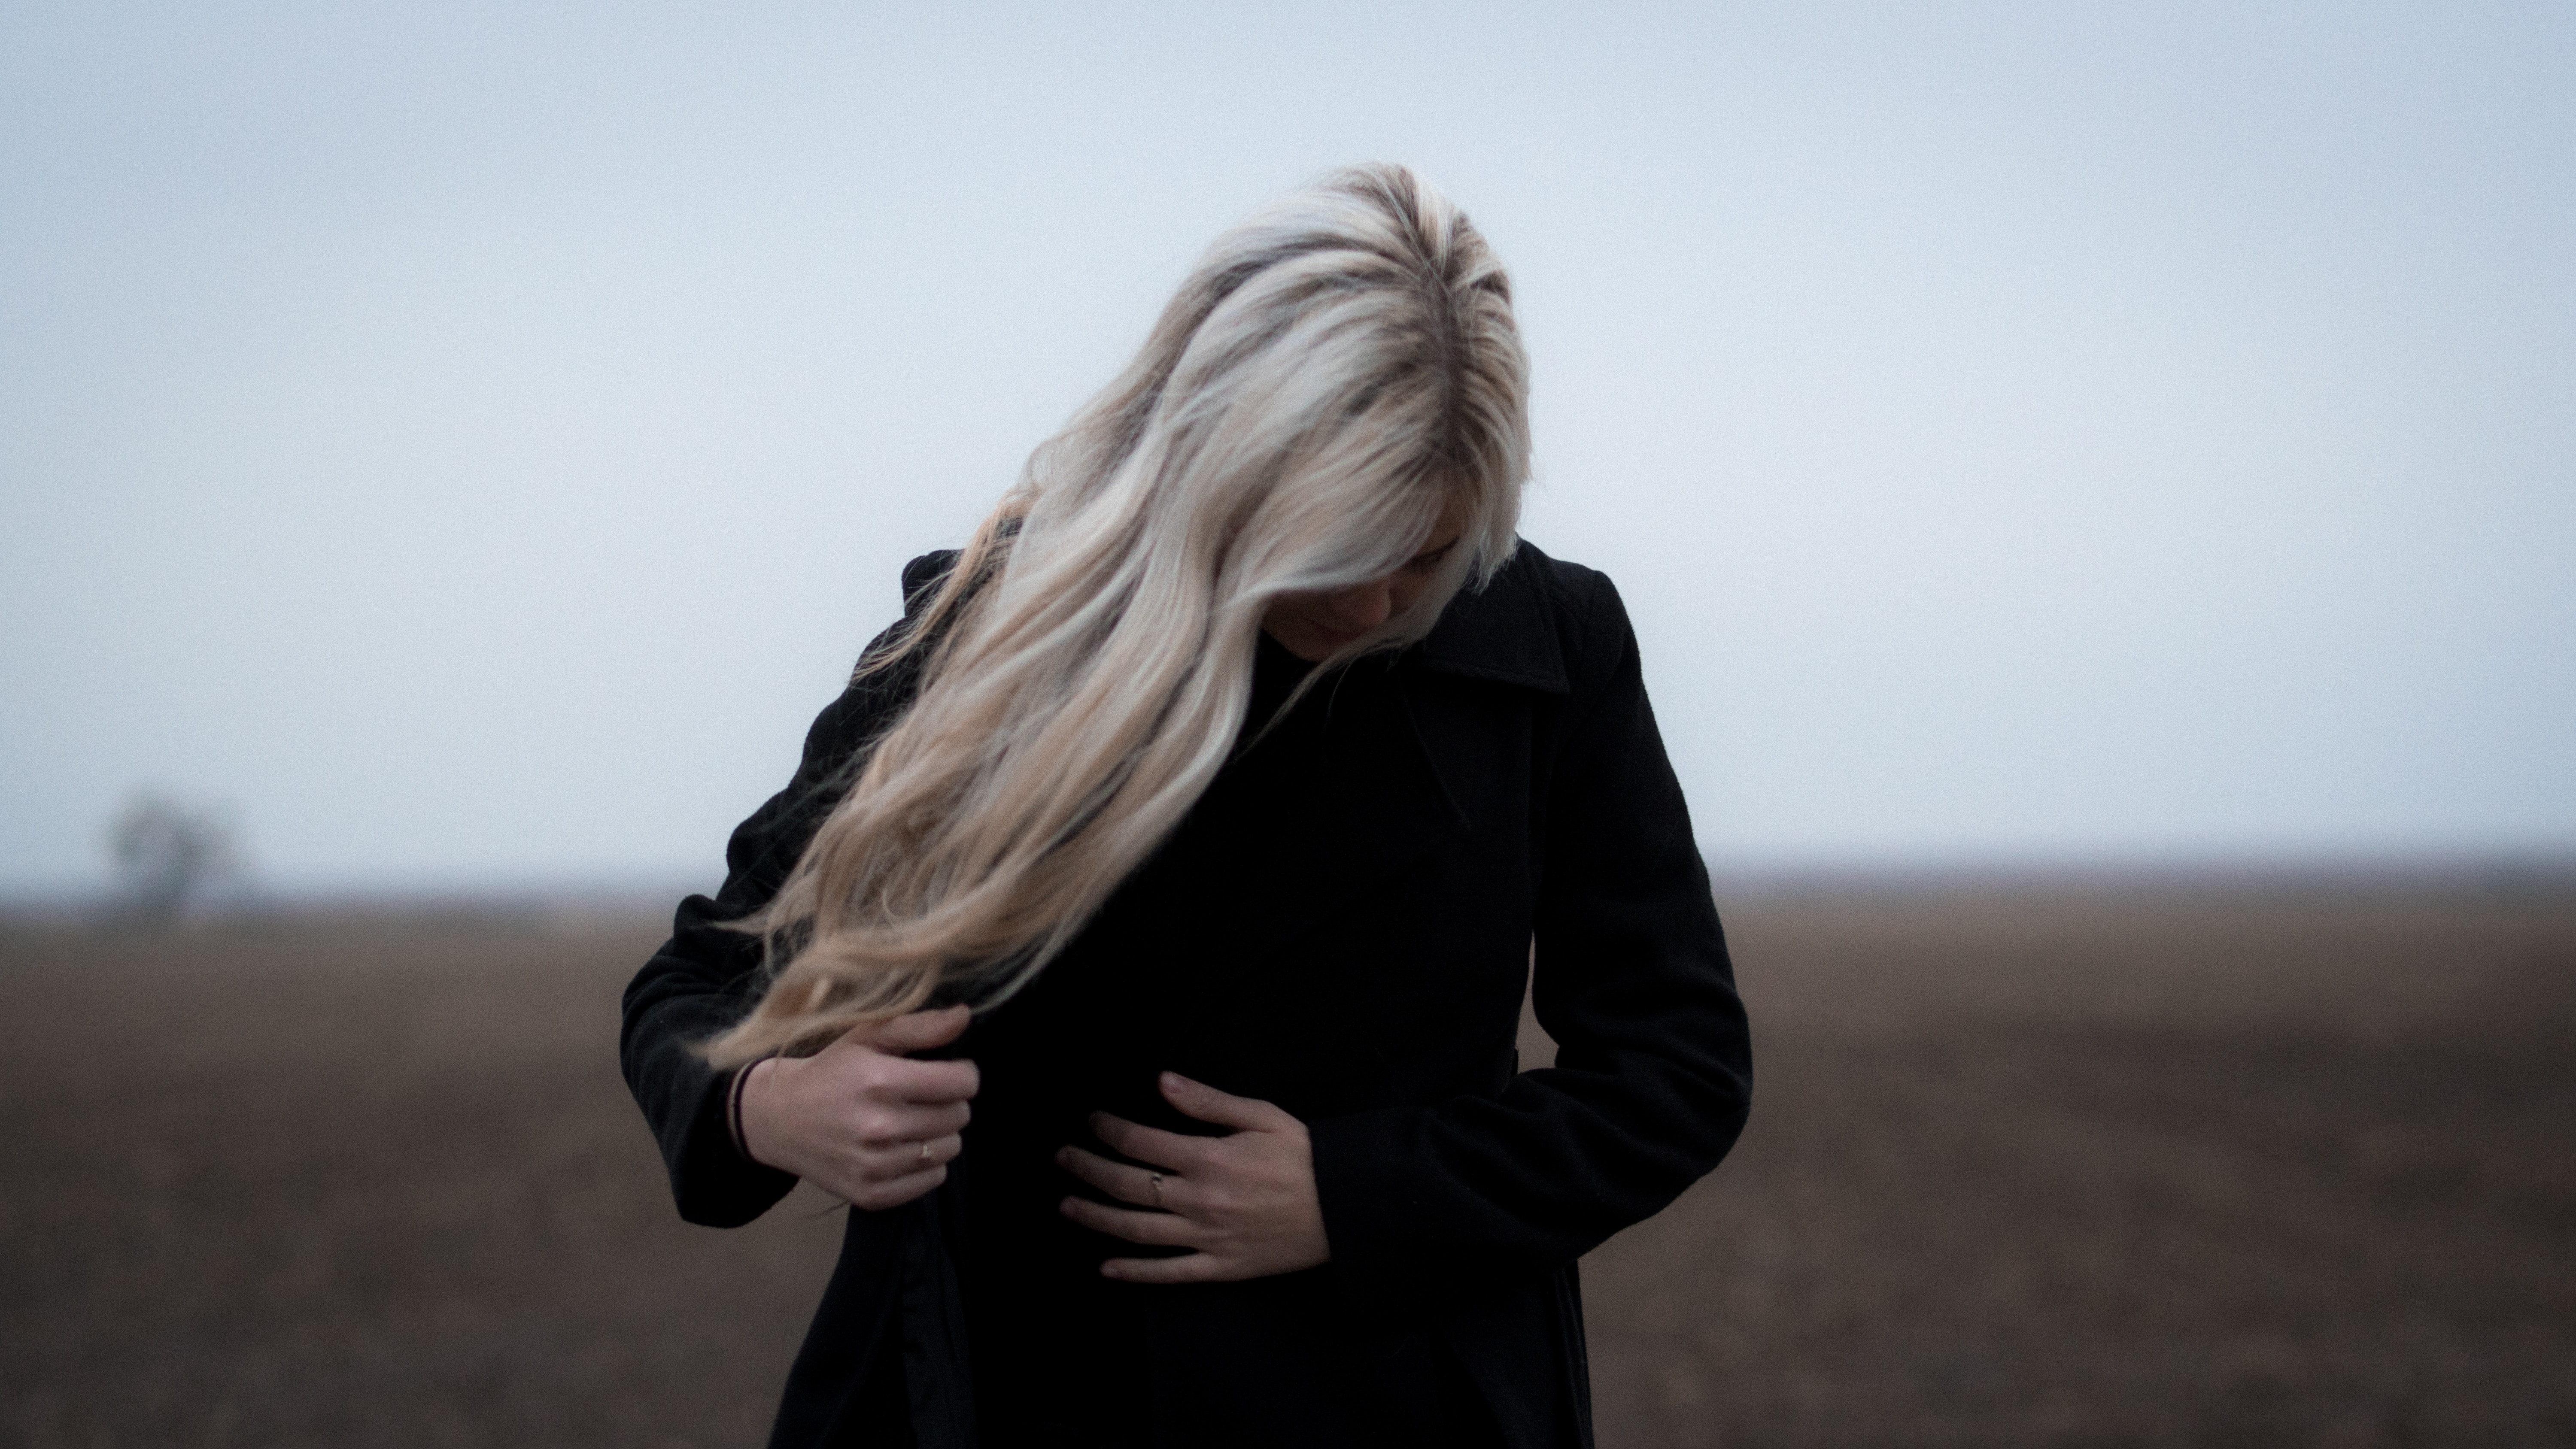 An image of a person with blonde hair standing in a field.